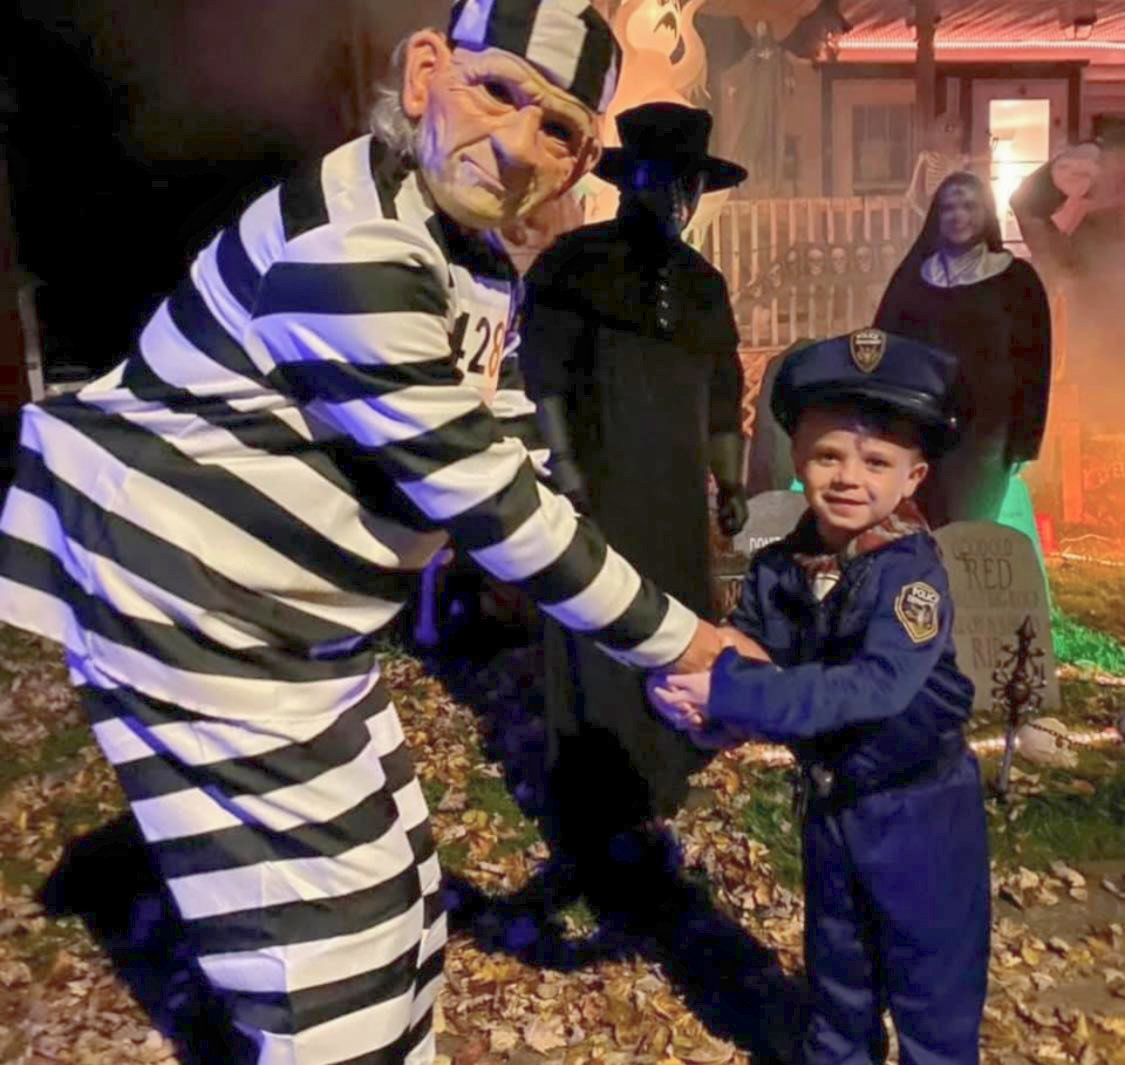 A little boy dressed as a cop for Halloween catches a runaway prisoner while trick-or-treating